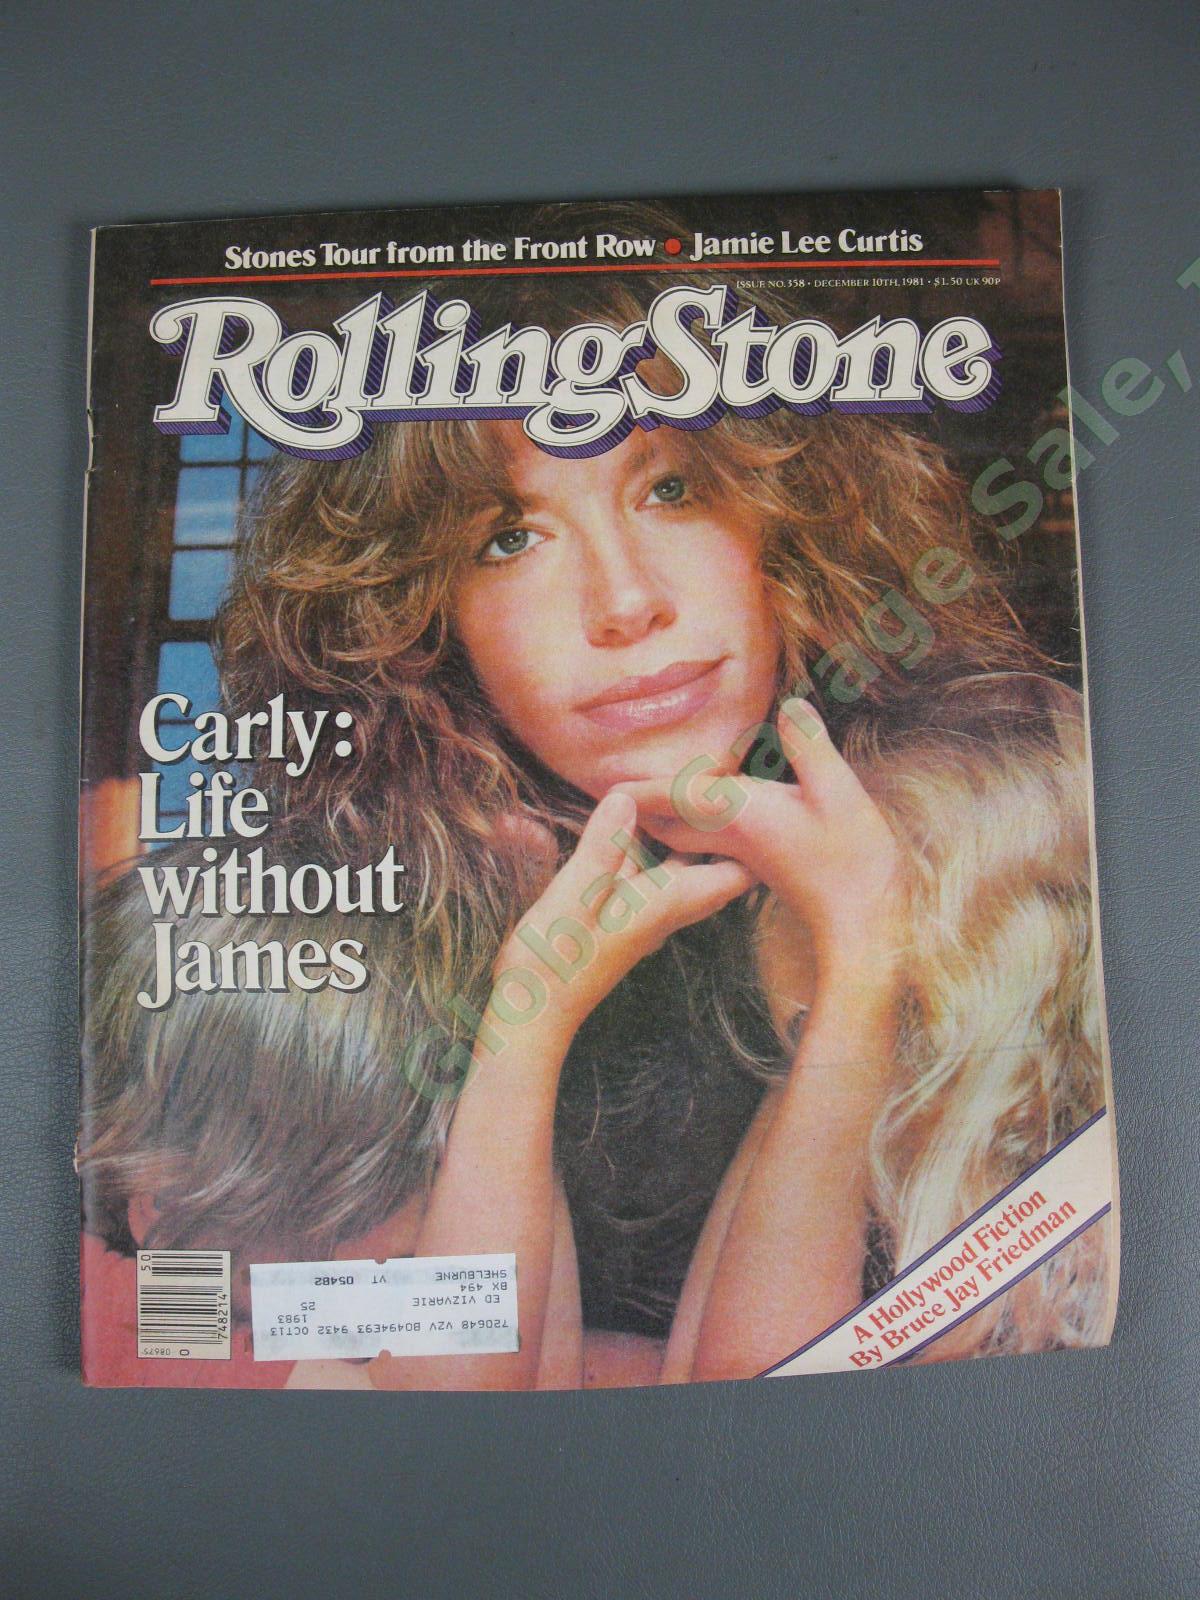 COMPLETE VINTAGE Full Year Run 1981 Rolling Stone Magazine Collection Lot Set NR 6